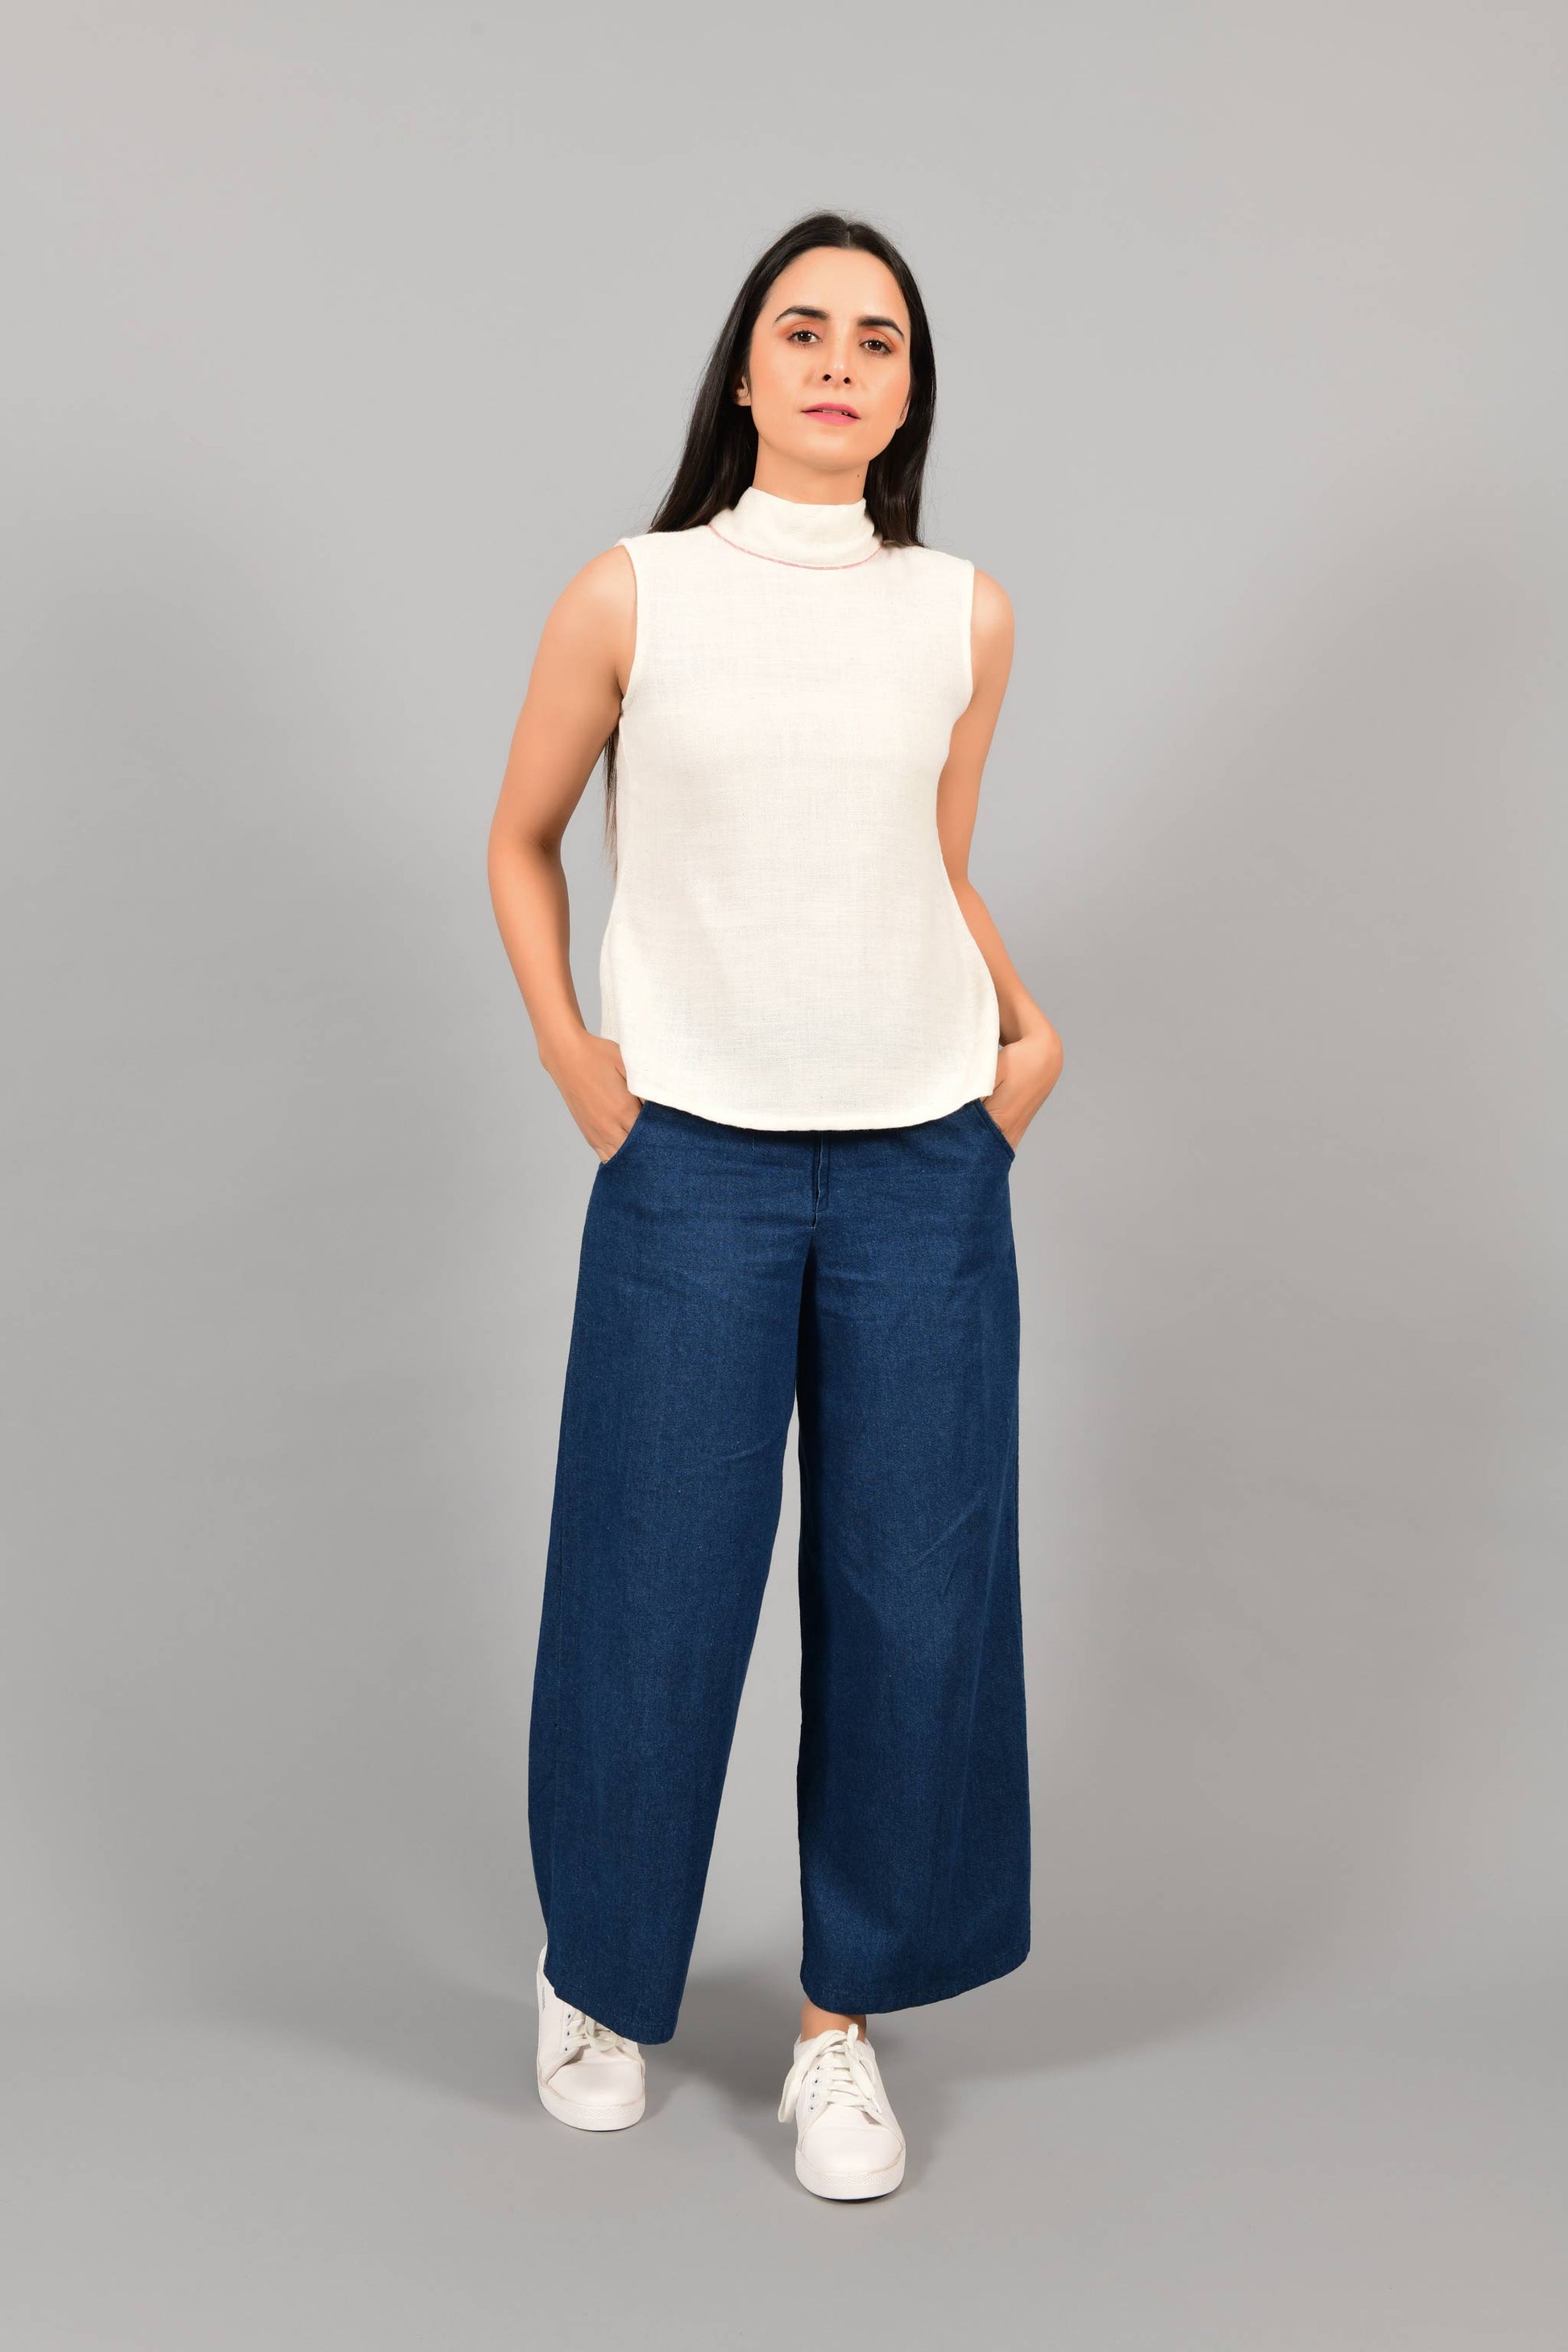 Front pose of an Indian female womenswear fashion model in an off-white Cashmere Cotton Top with a bow collar made with handspun and handwoven khadi cotton by Cotton Rack.